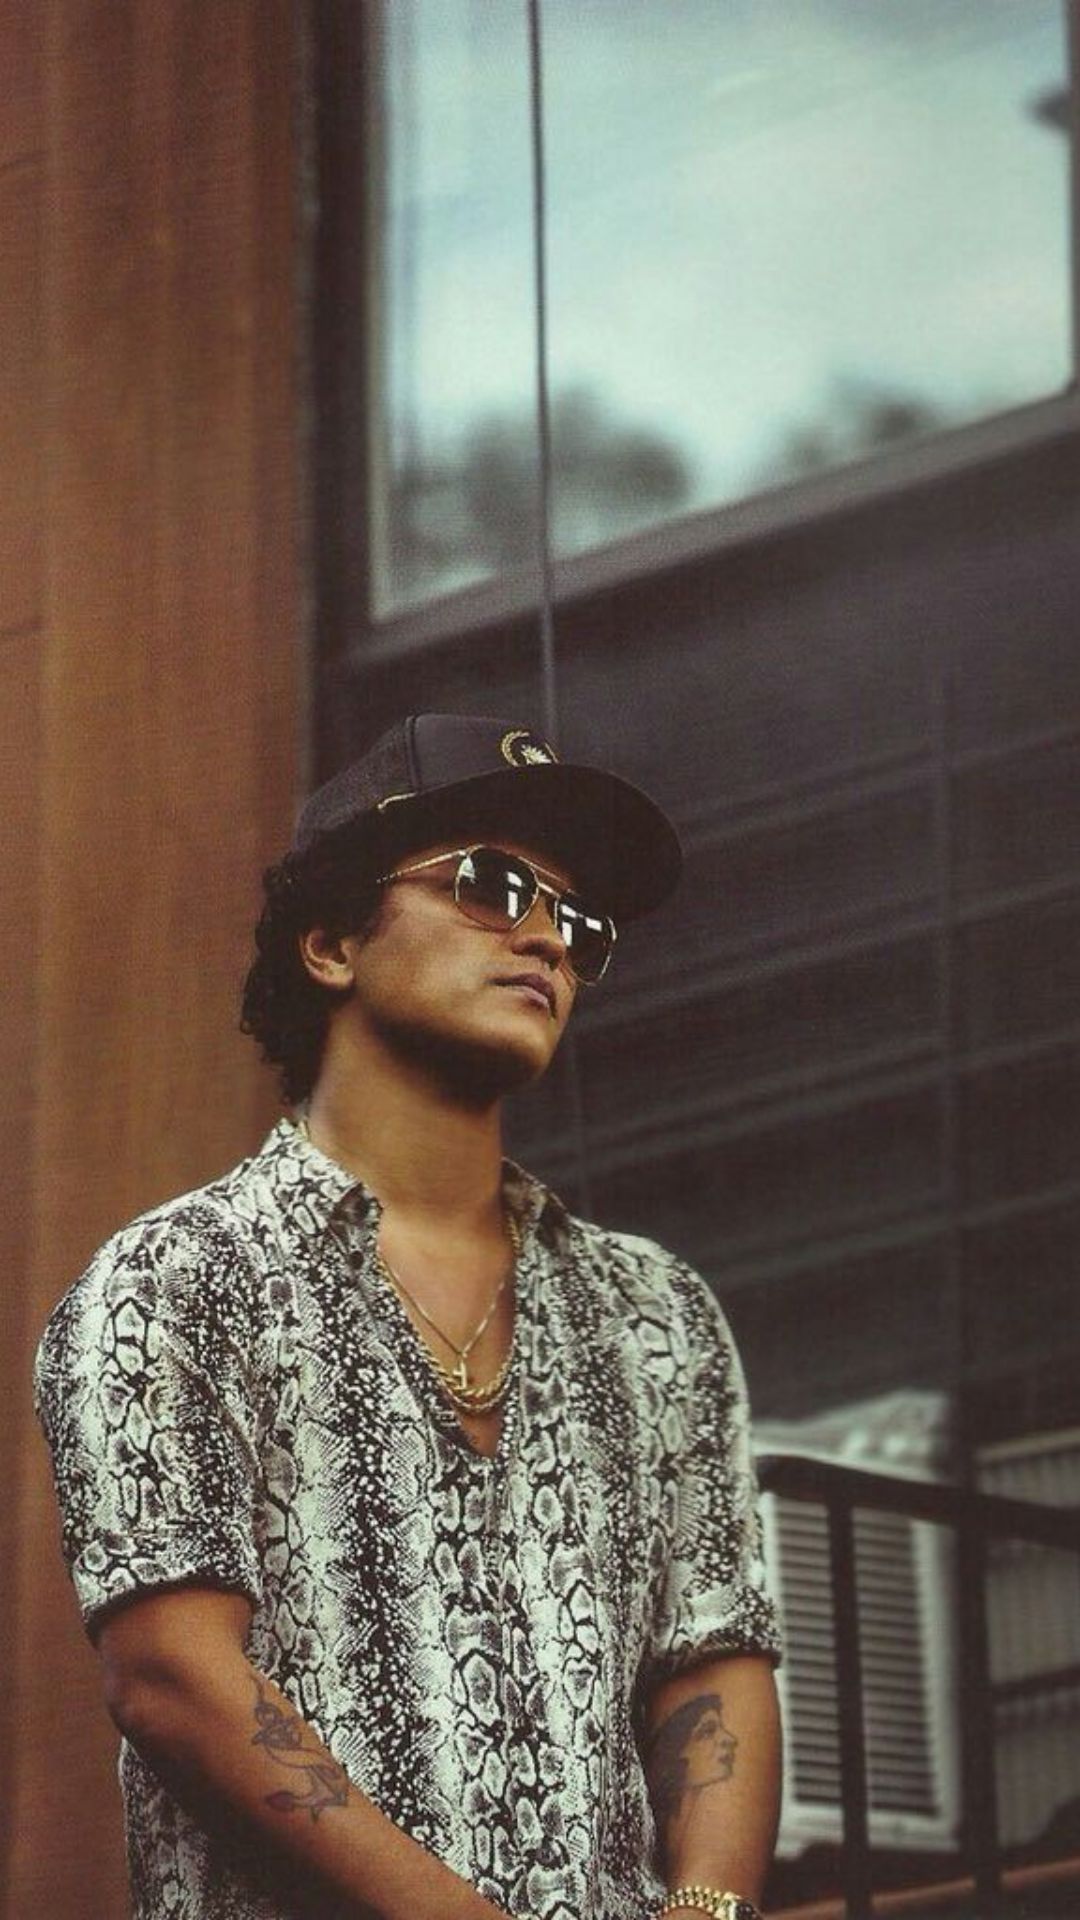 Bruno Mars is a famous singer and songwriter - Bruno Mars